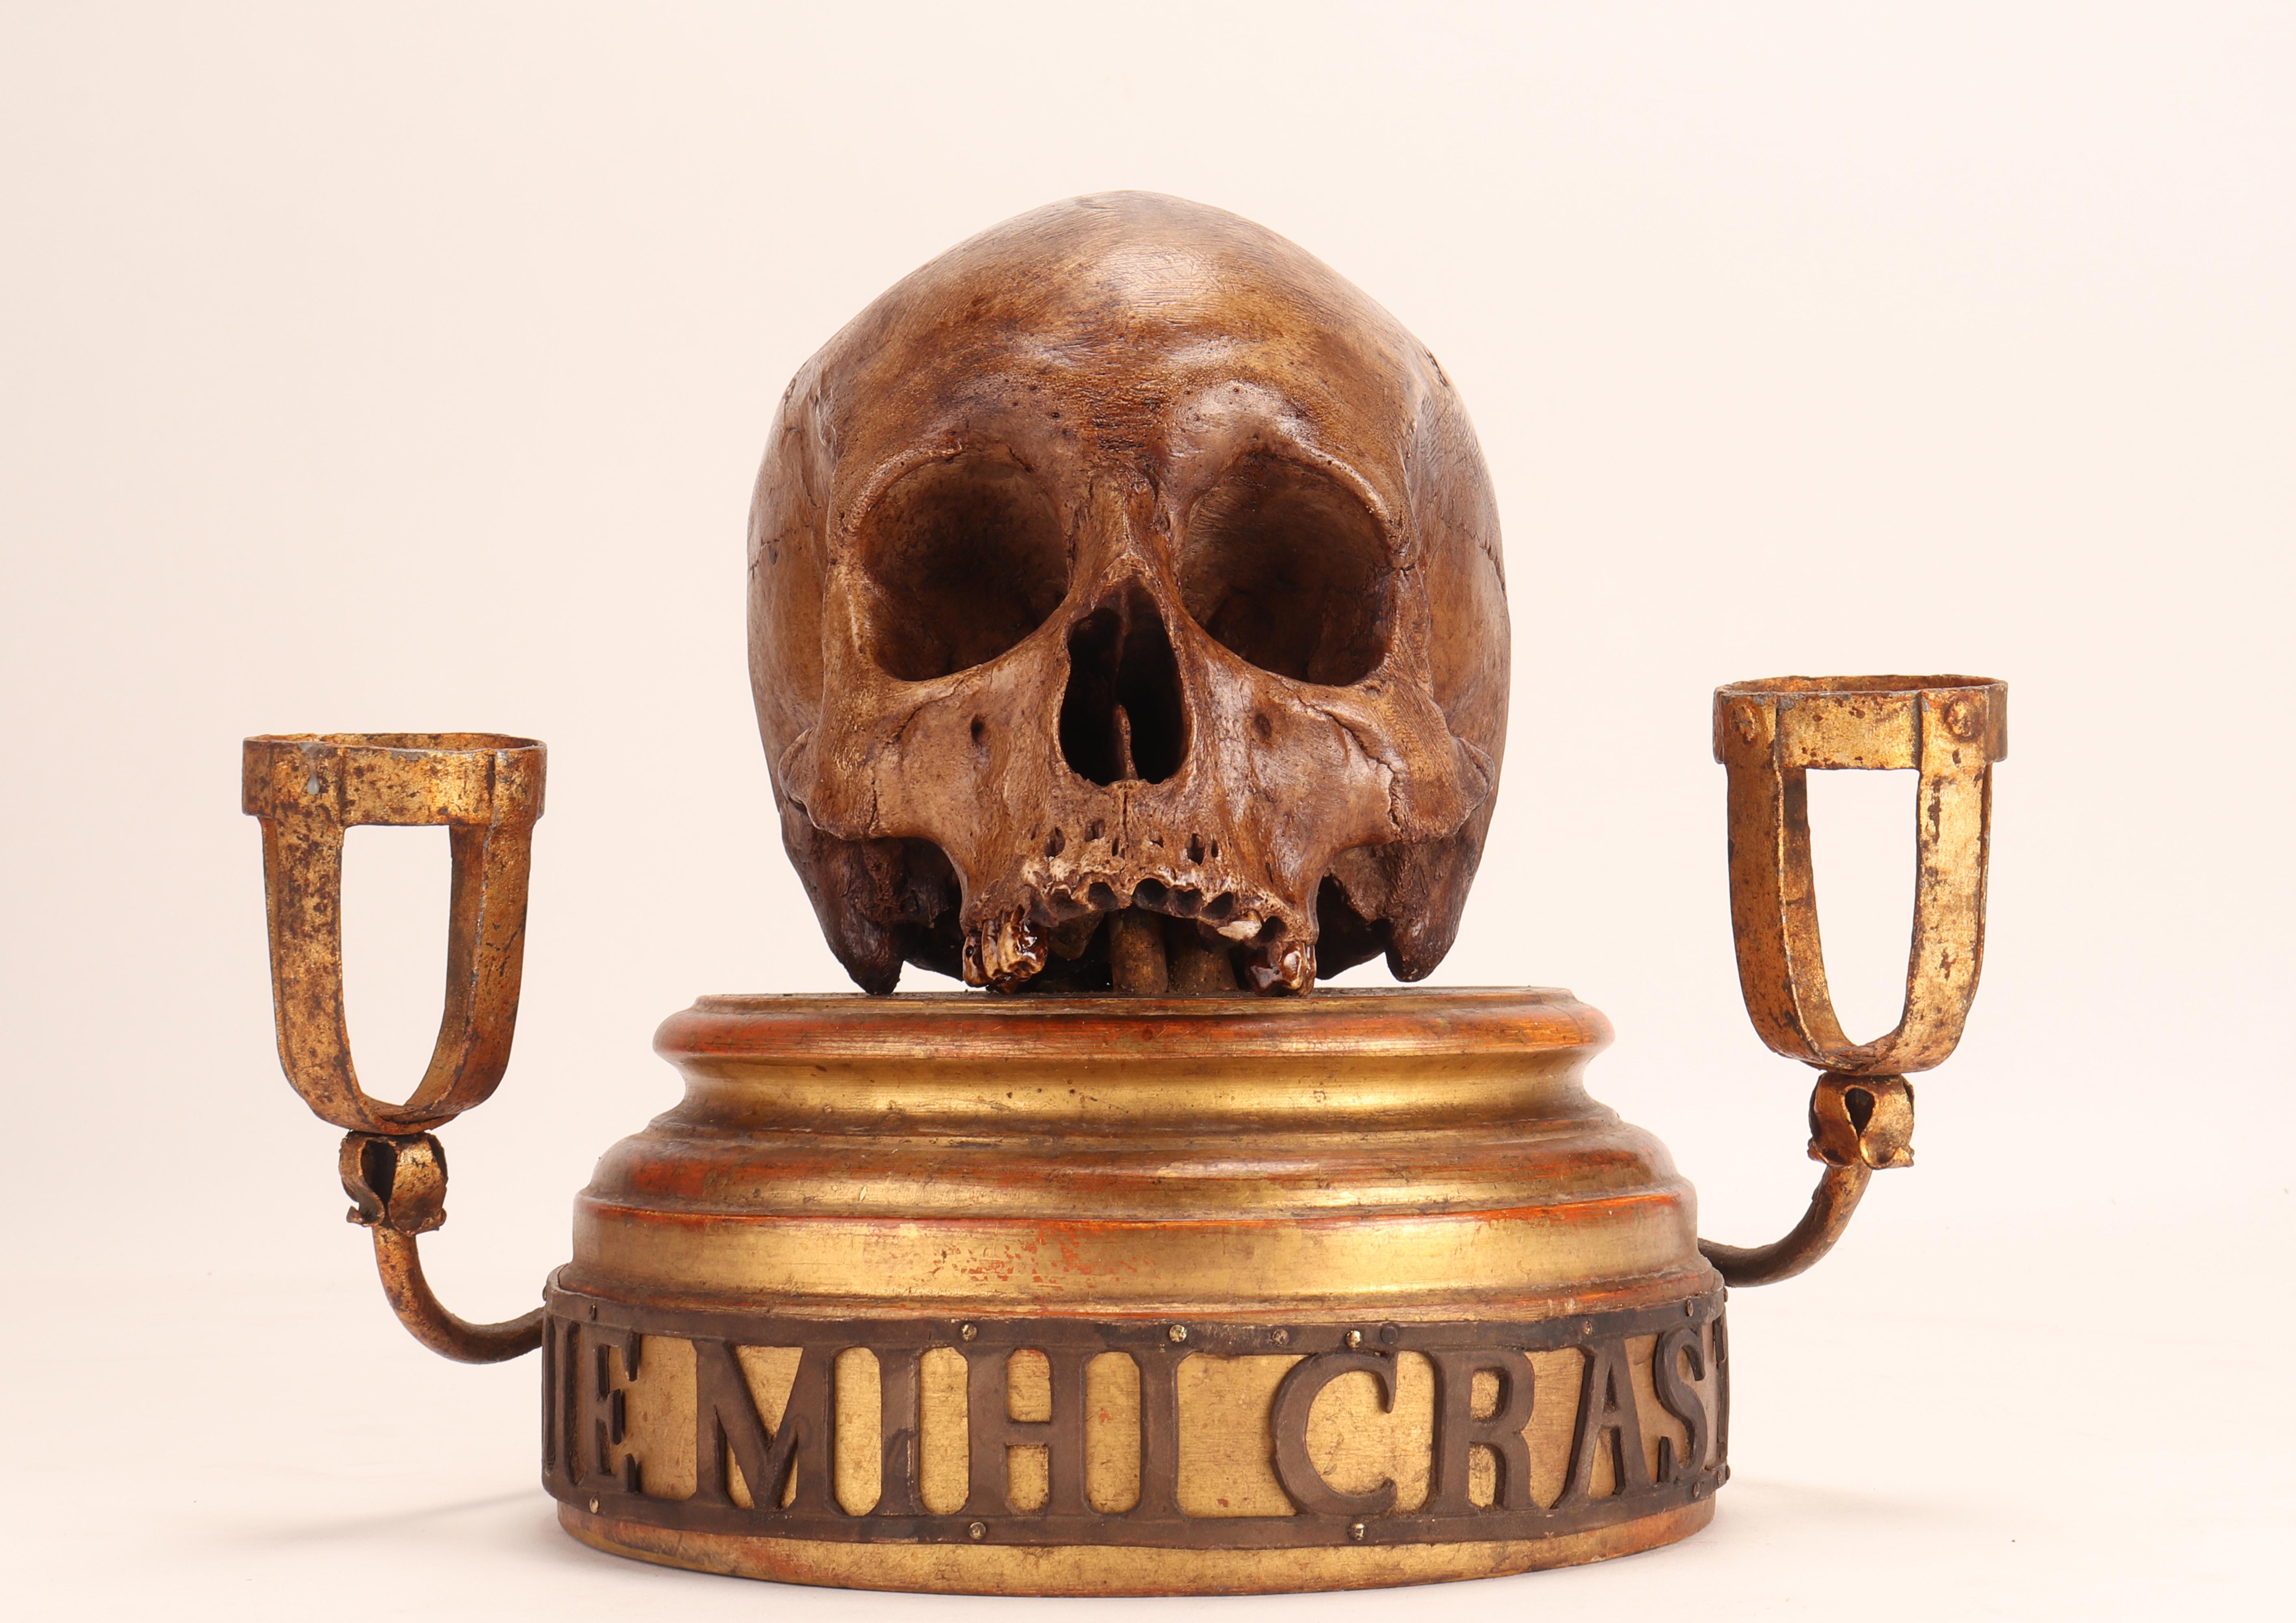 A plaster sculpture depicting a skull is placed above the base of a plinth in the shape of a column, made of fir wood and finished with pastiglia (refined plaster) and gilded gold.
Above the top of the base, the skull is fixed.
Around the first